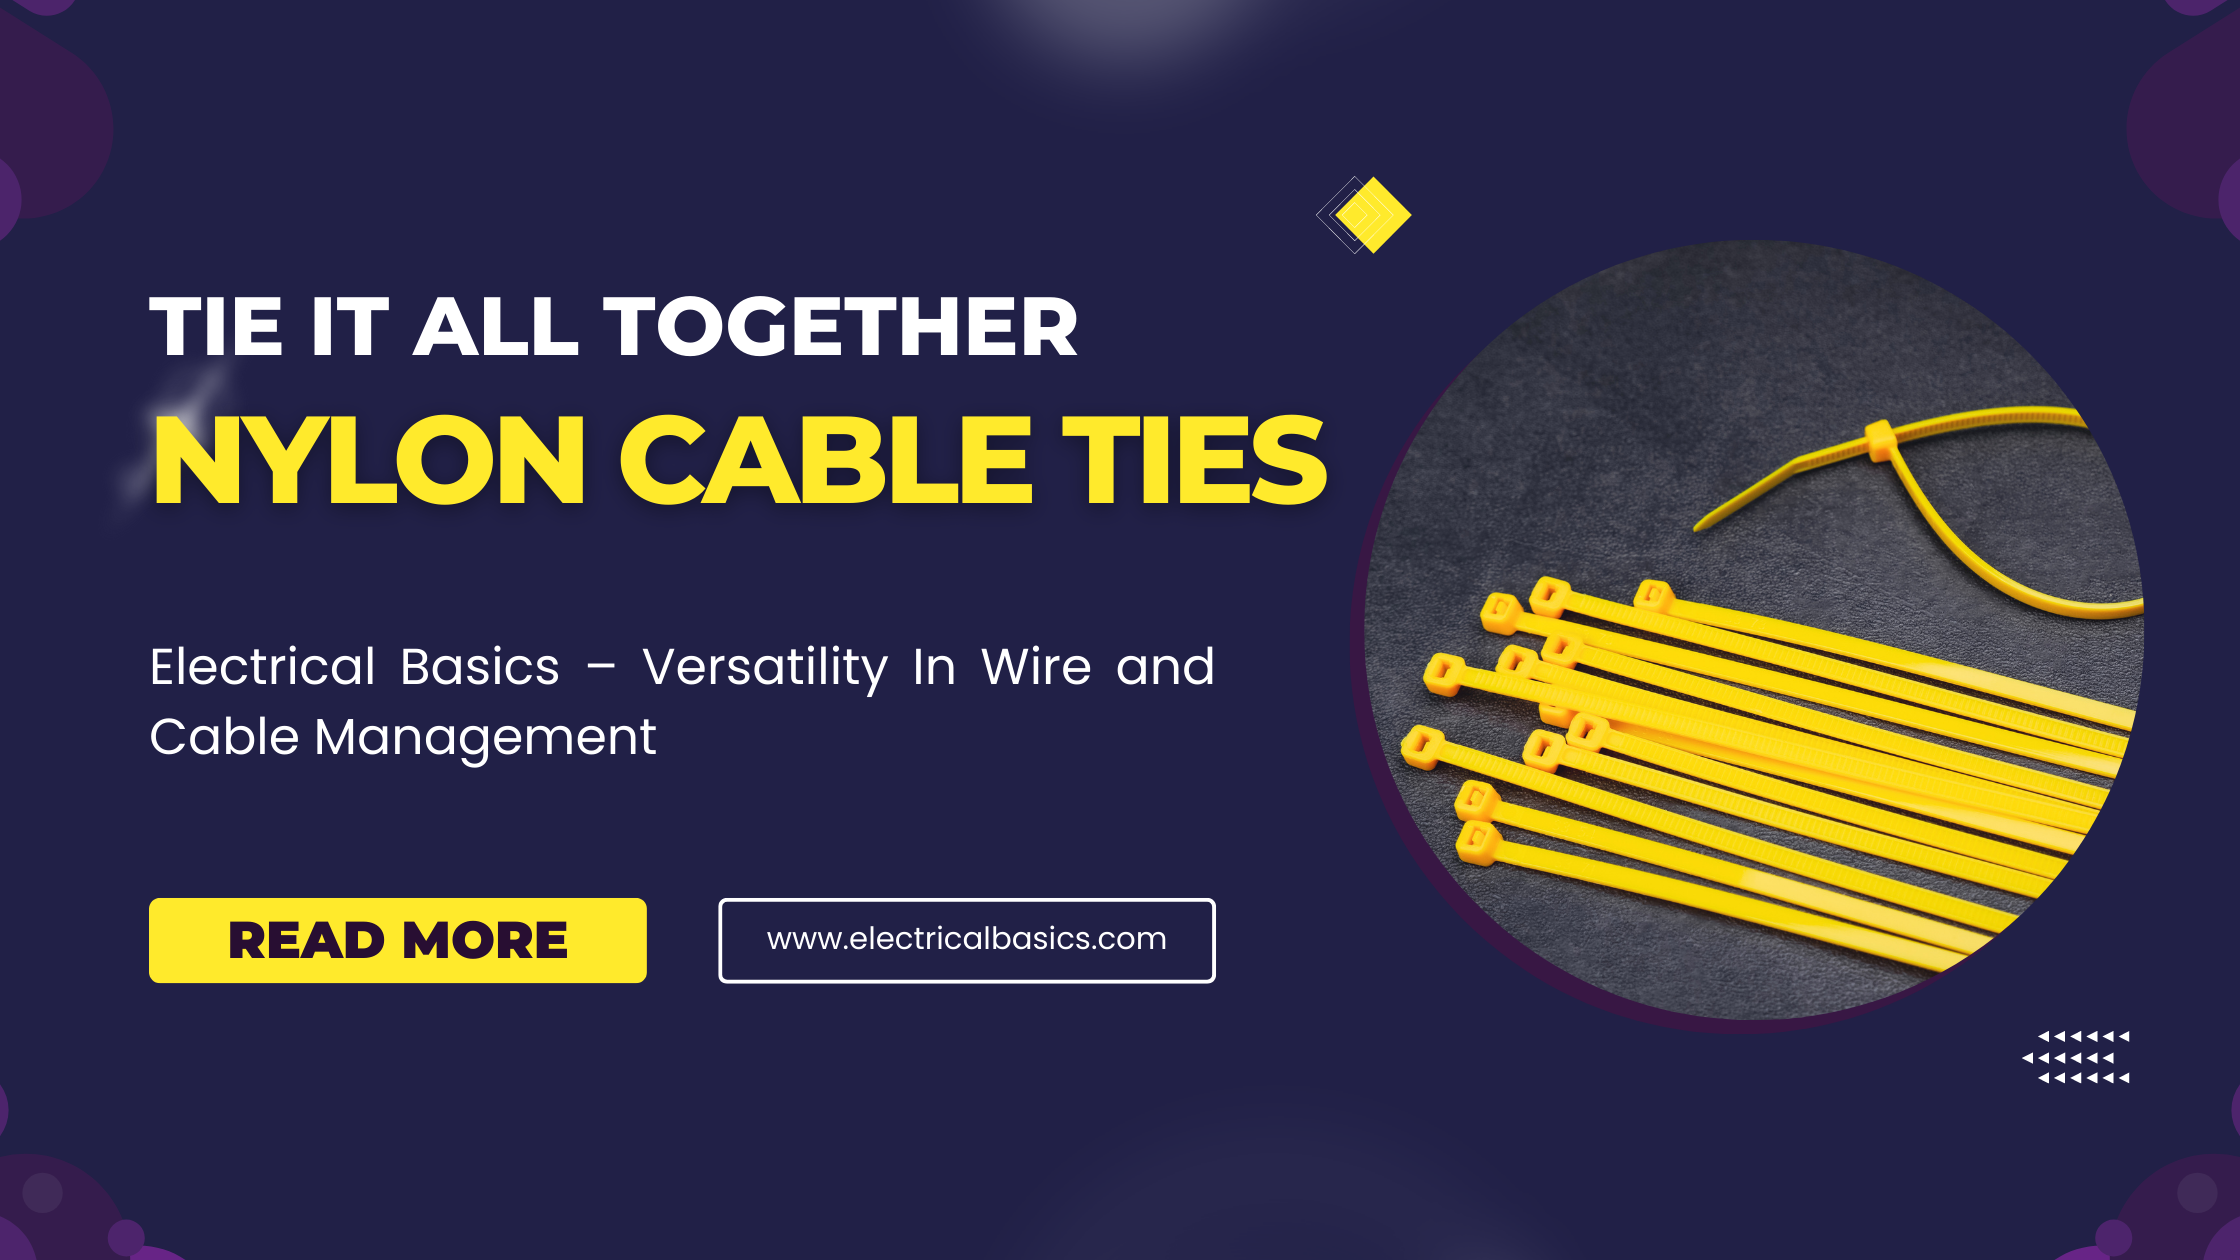 Nylon Cable Ties From Electrical Basics – Versatility In Wire and Cable Management